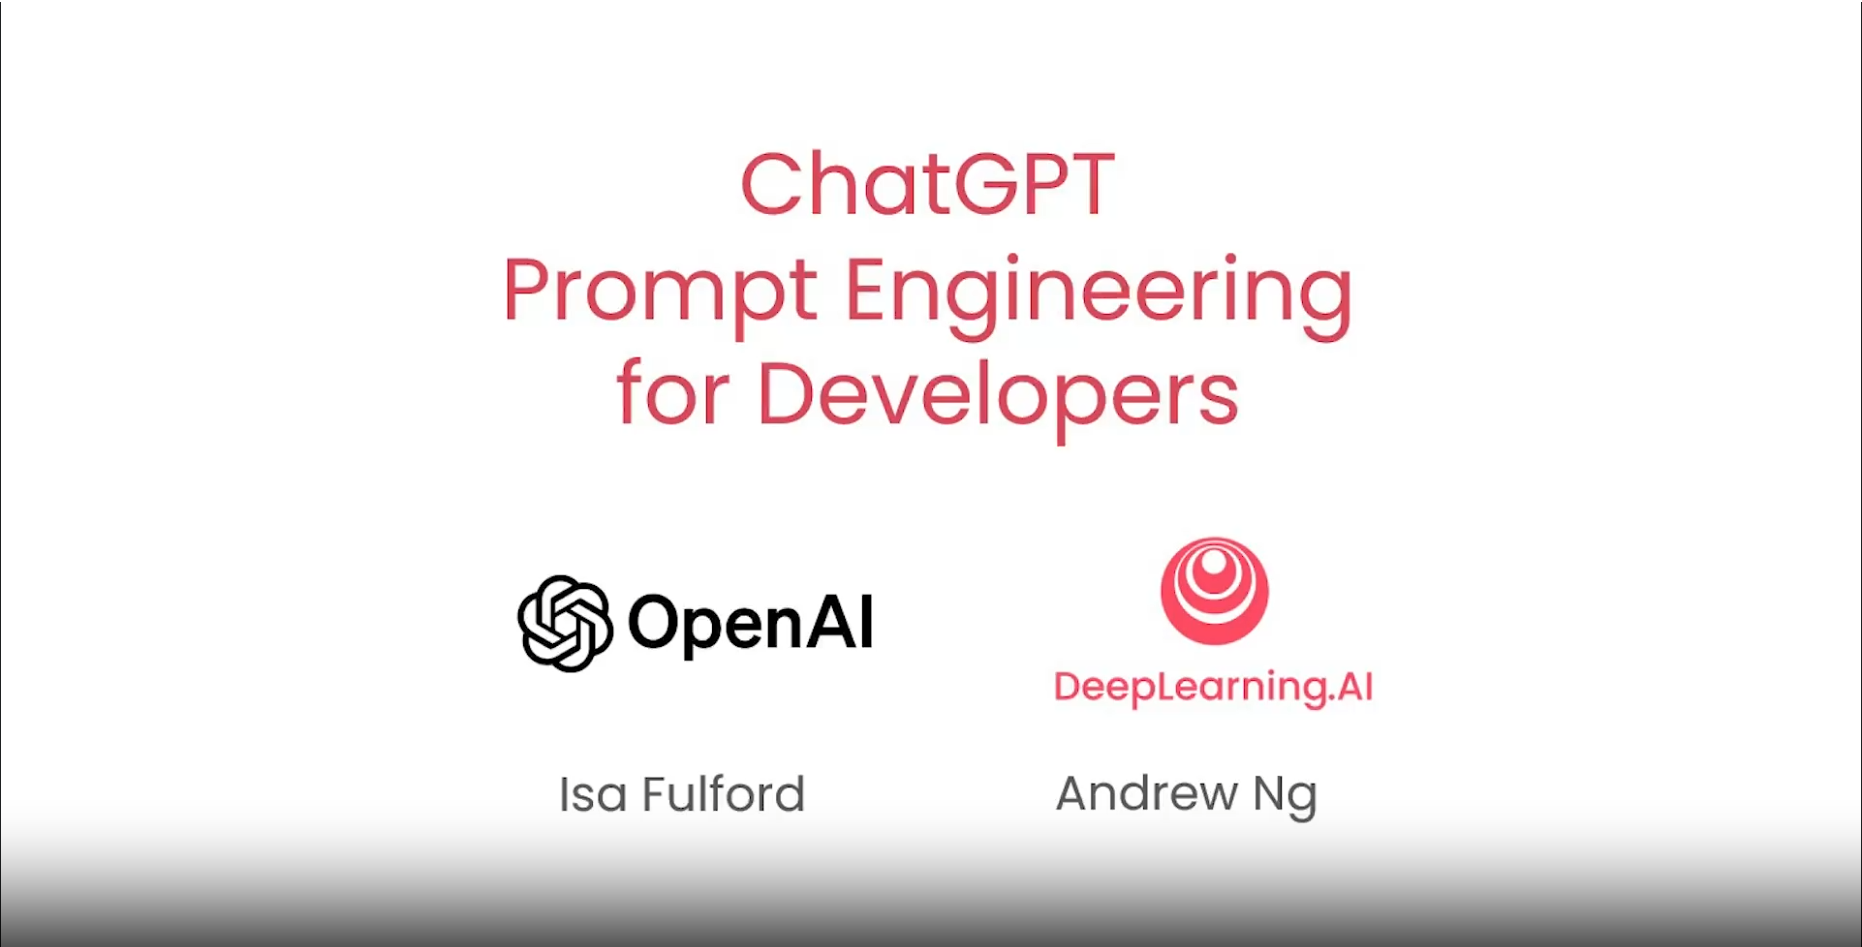 20220709 - ChatGPT Prompt Engineering for Developers